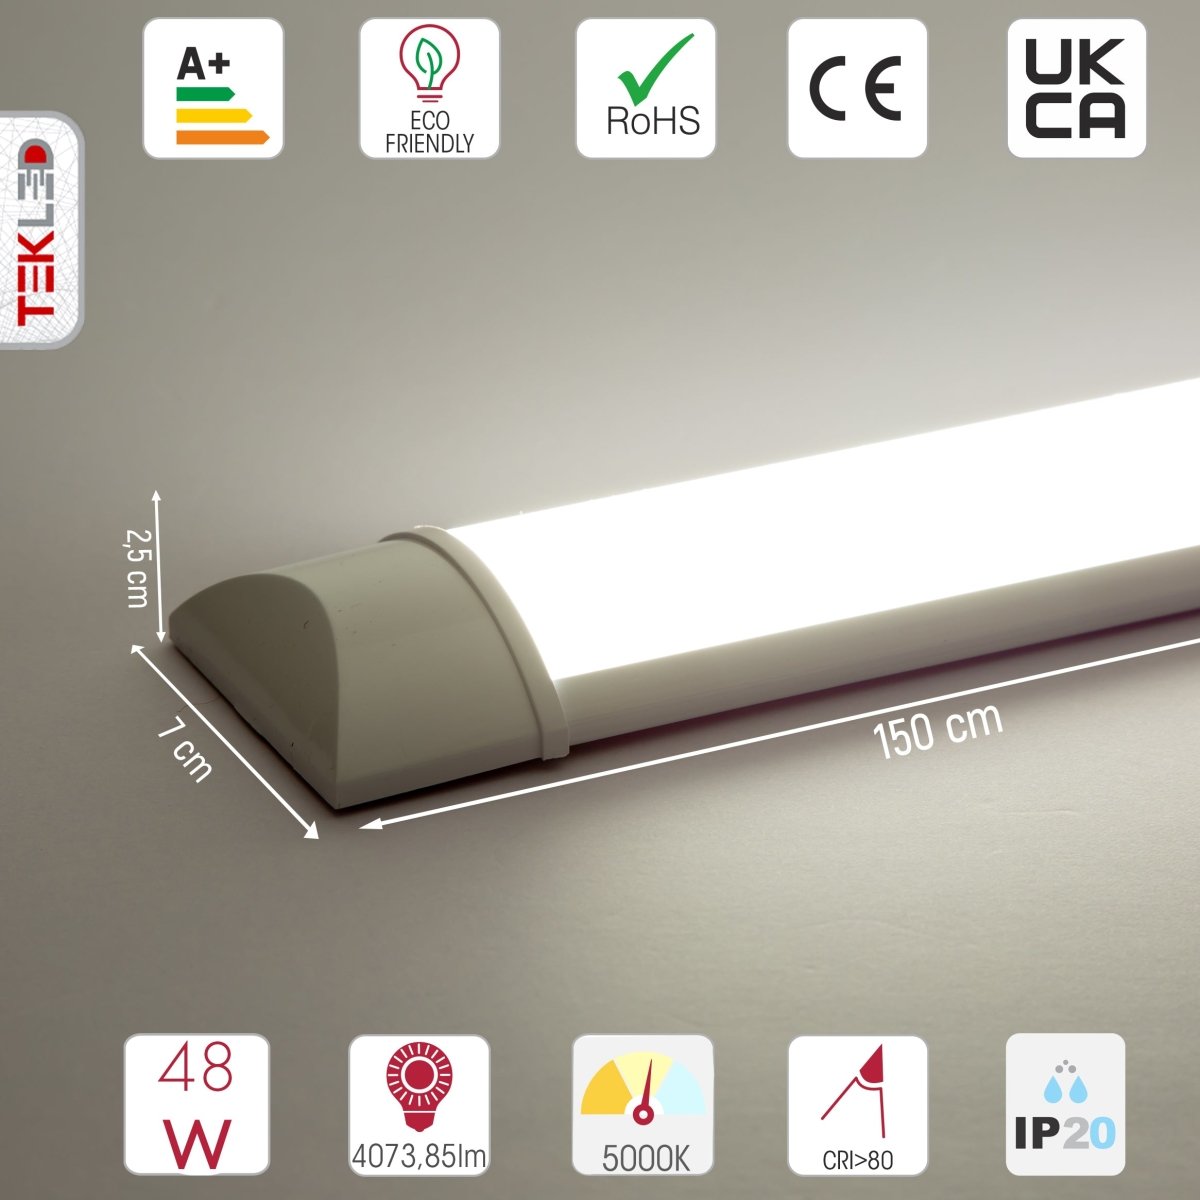 Technical specs and measurements for LED Surface Mounted Linear Fitting 48W 5000K Cool White IP20 150cm 5ft